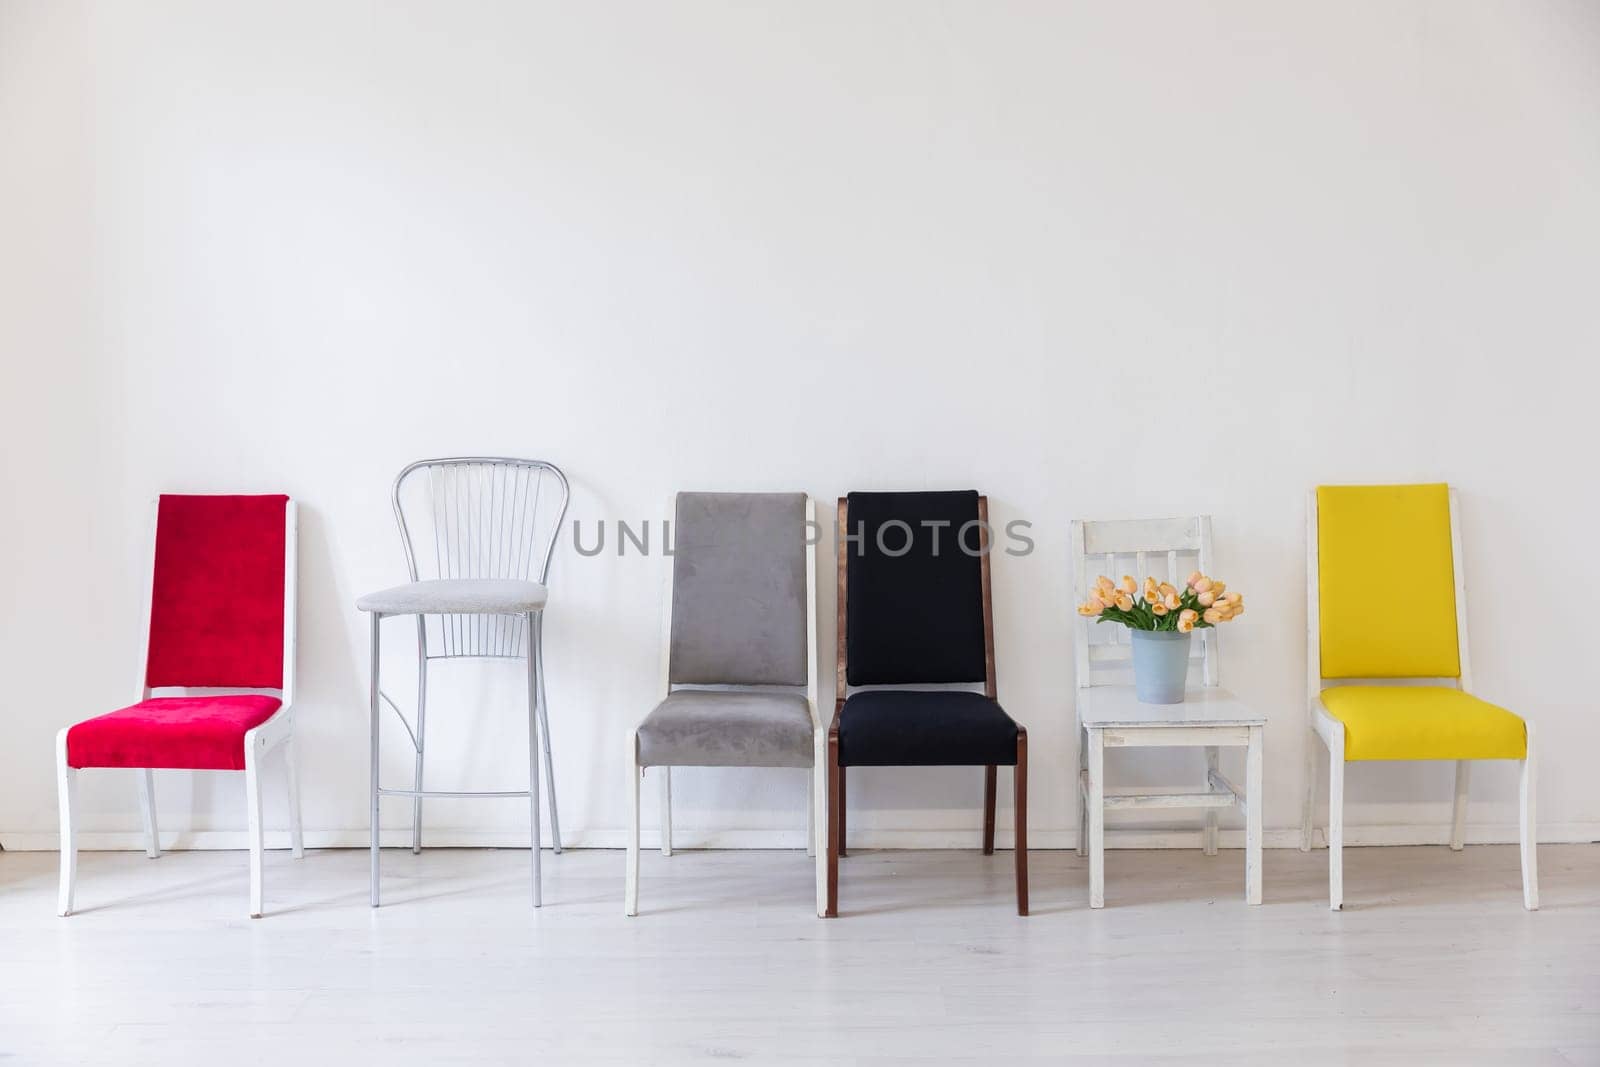 Lots of different chairs in the interior of a white room by Simakov